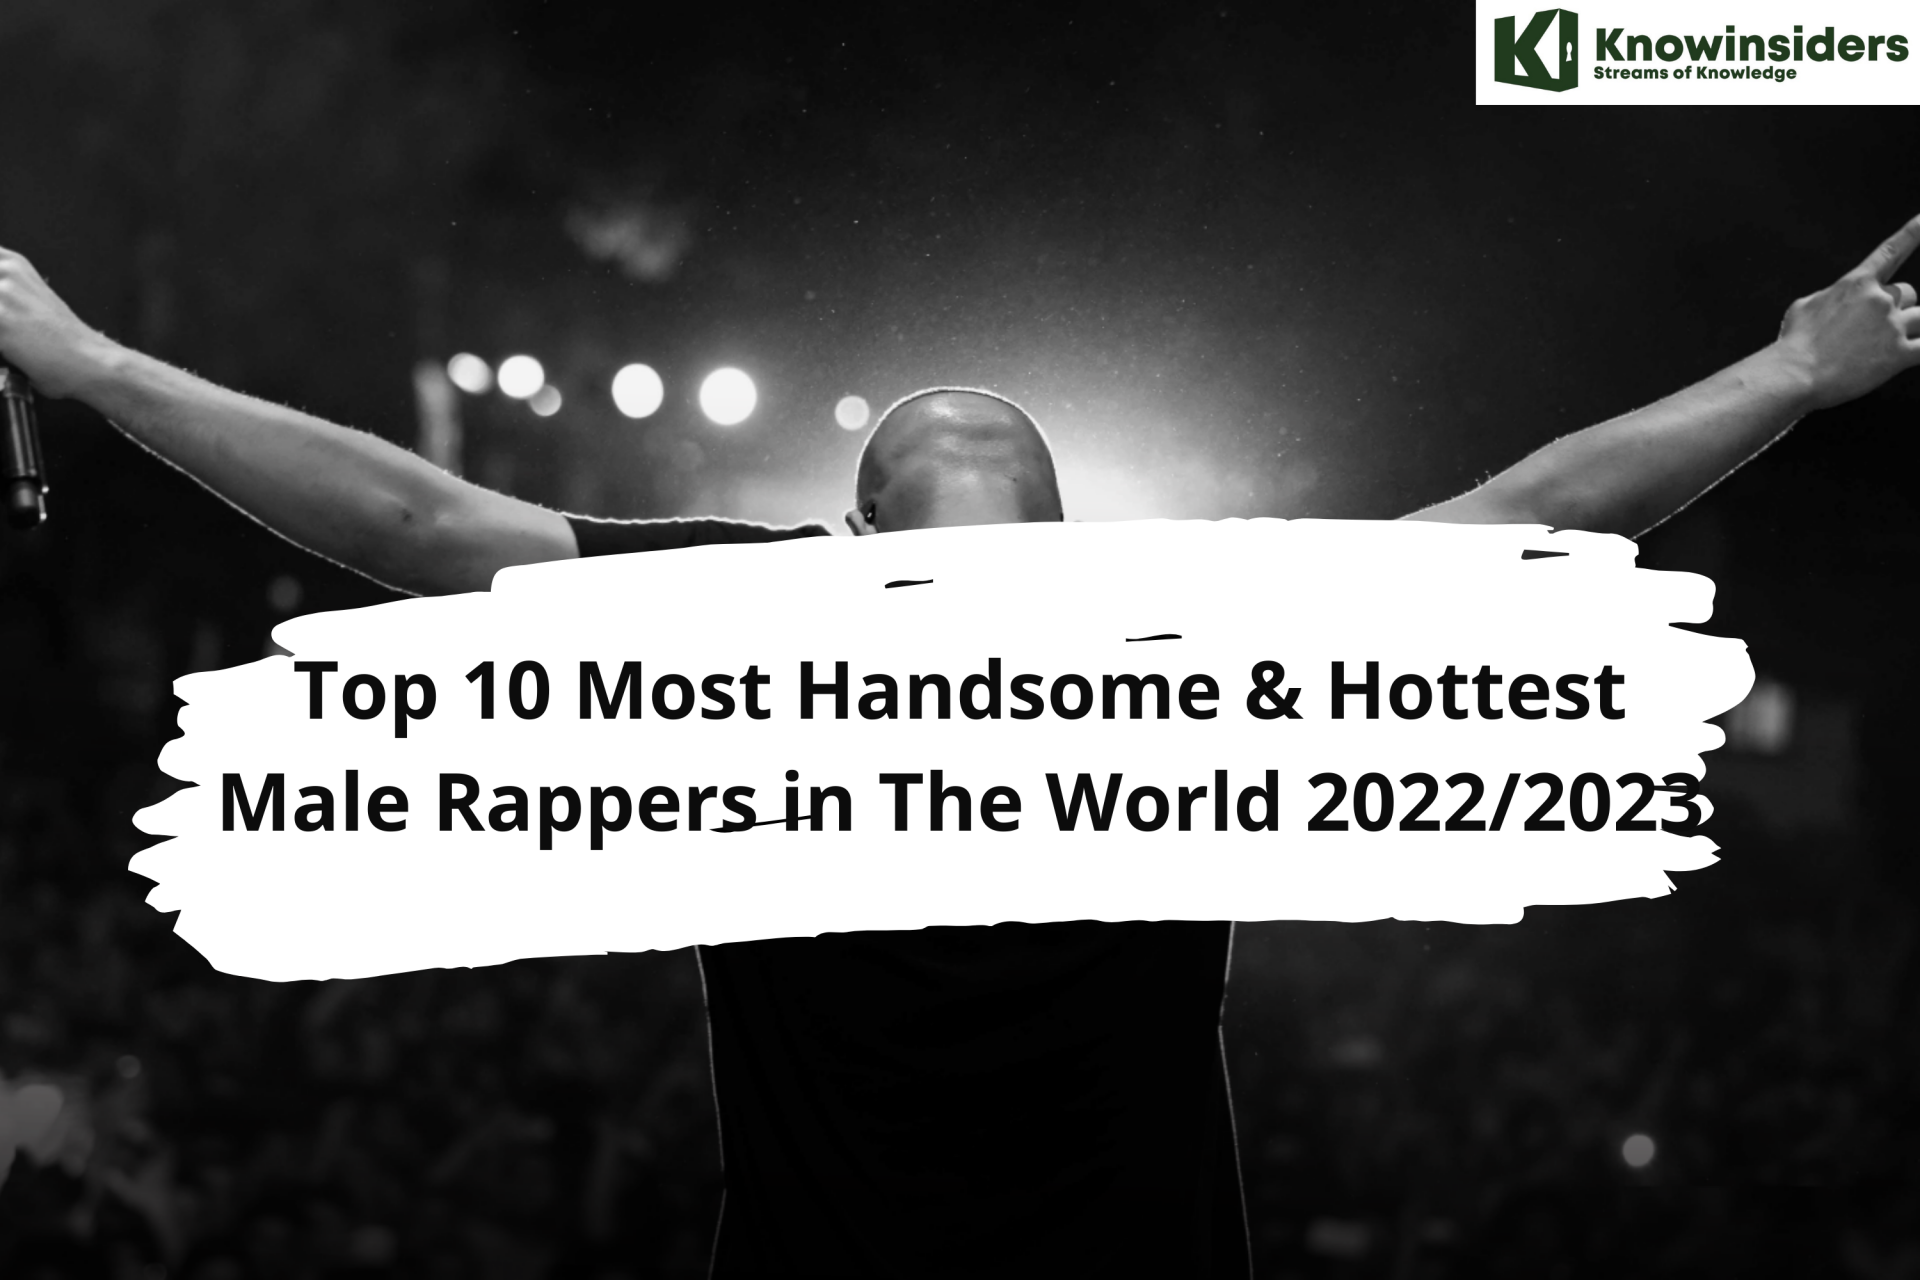 Top 10 Most Handsome & Hottest Male Rappers in The World 2022/2023